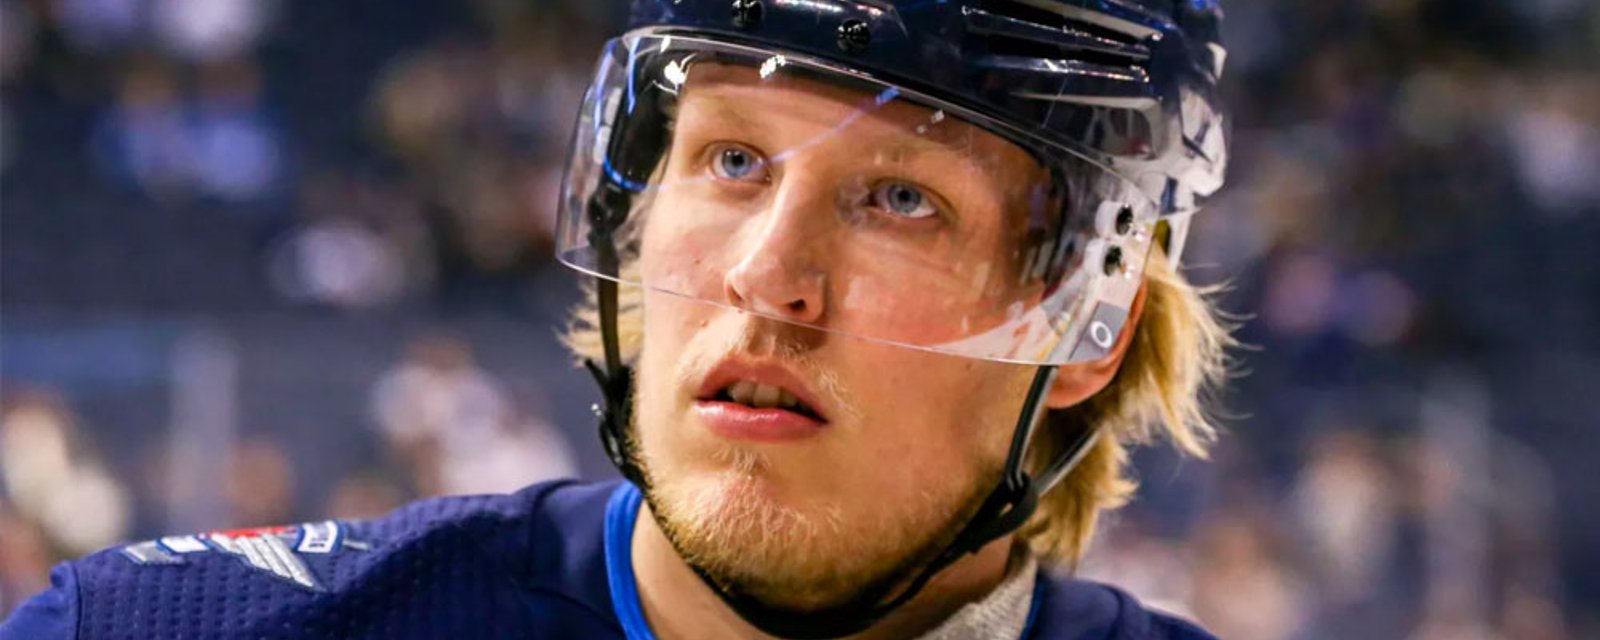 NHL insider reports Laine’s attitude may force Jets to make a trade!